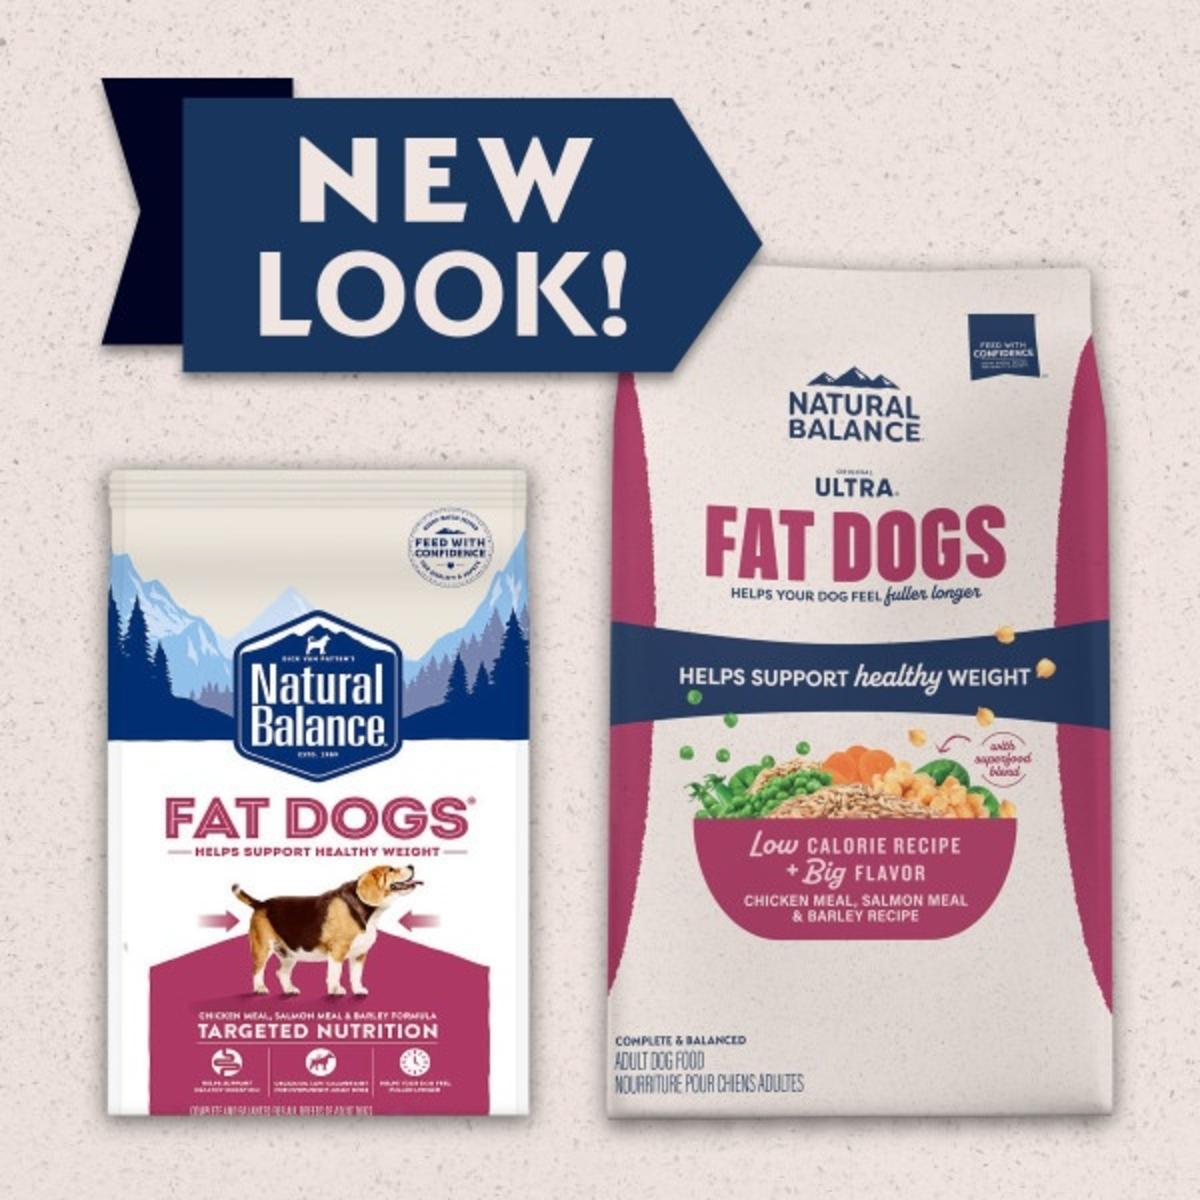 Natural Balance® Original Ultra® Fat Dogs Chicken Meal, Salmon Meal & Barley Recipe nutrition  New Look